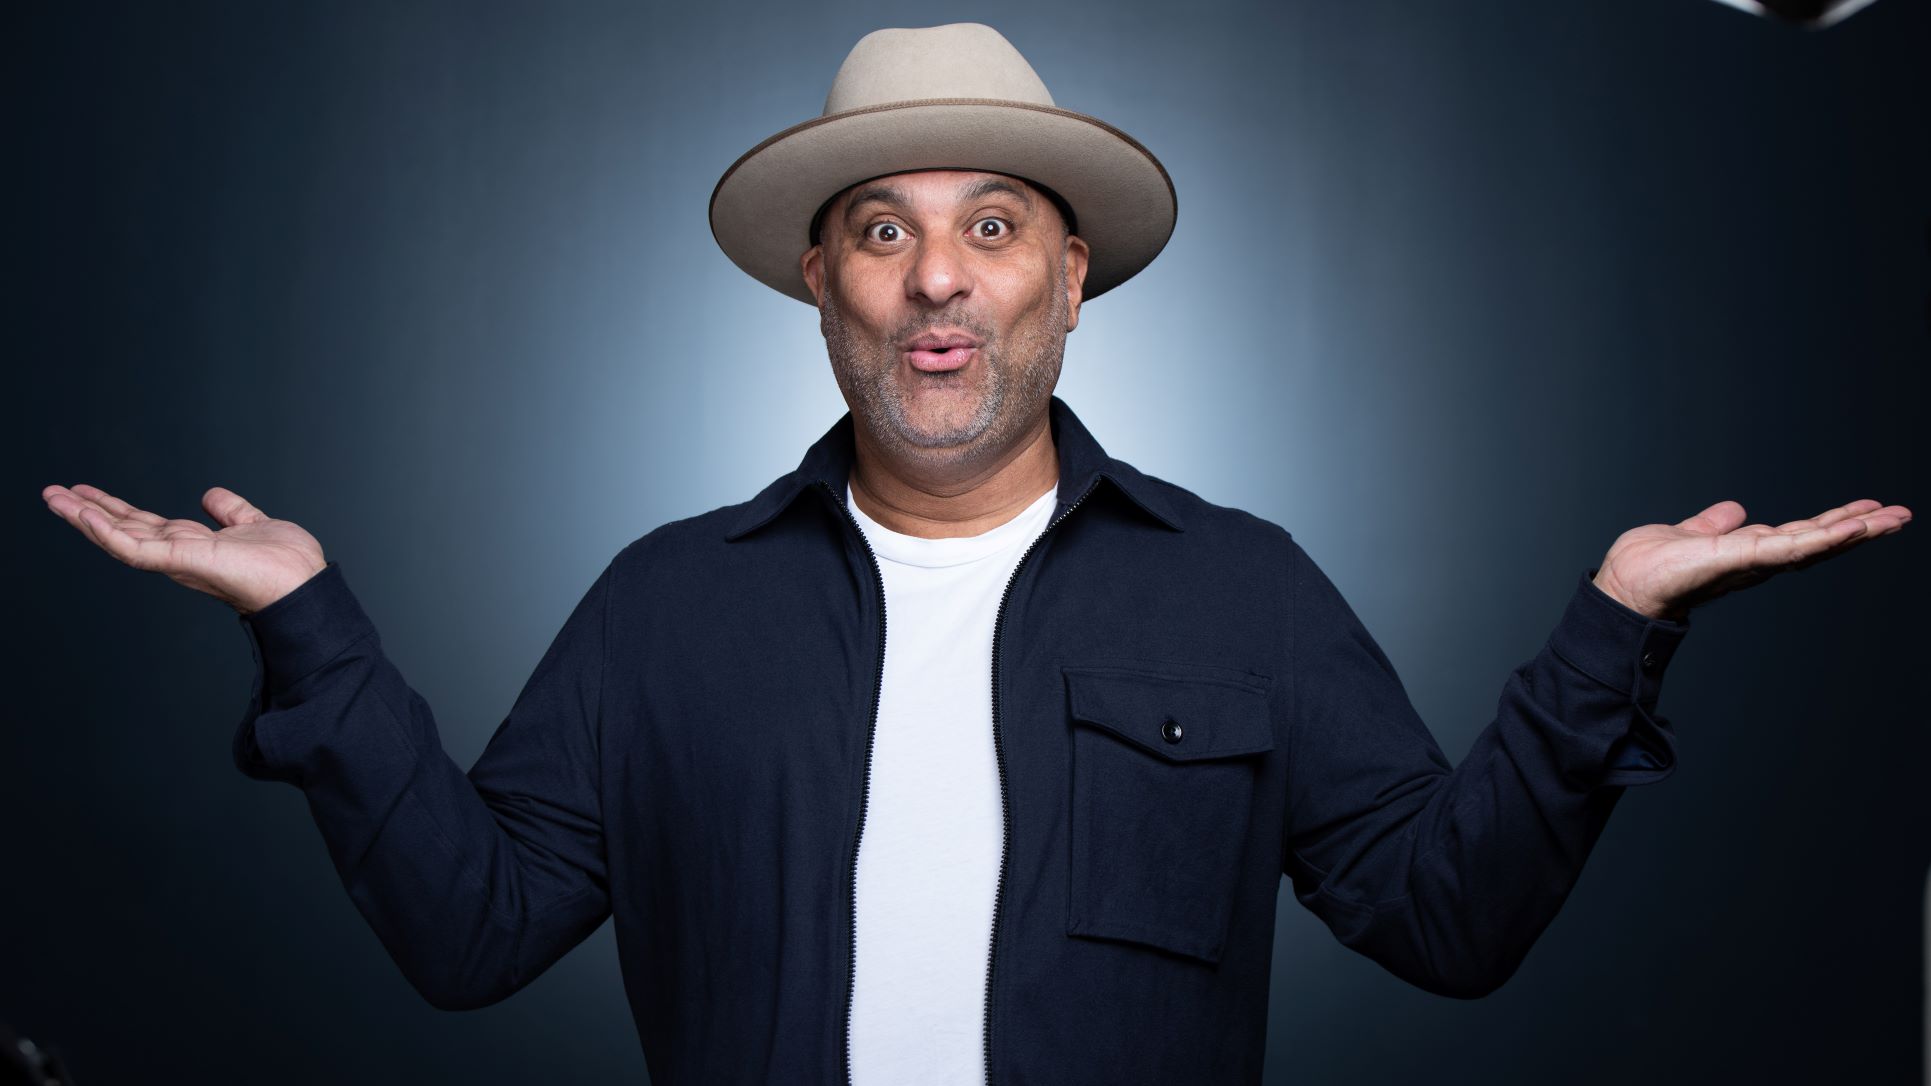 COMEDIAN RUSSELL PETERS RETURNS TO NJPAC WITH ACT YOUR AGE WORLD TOUR